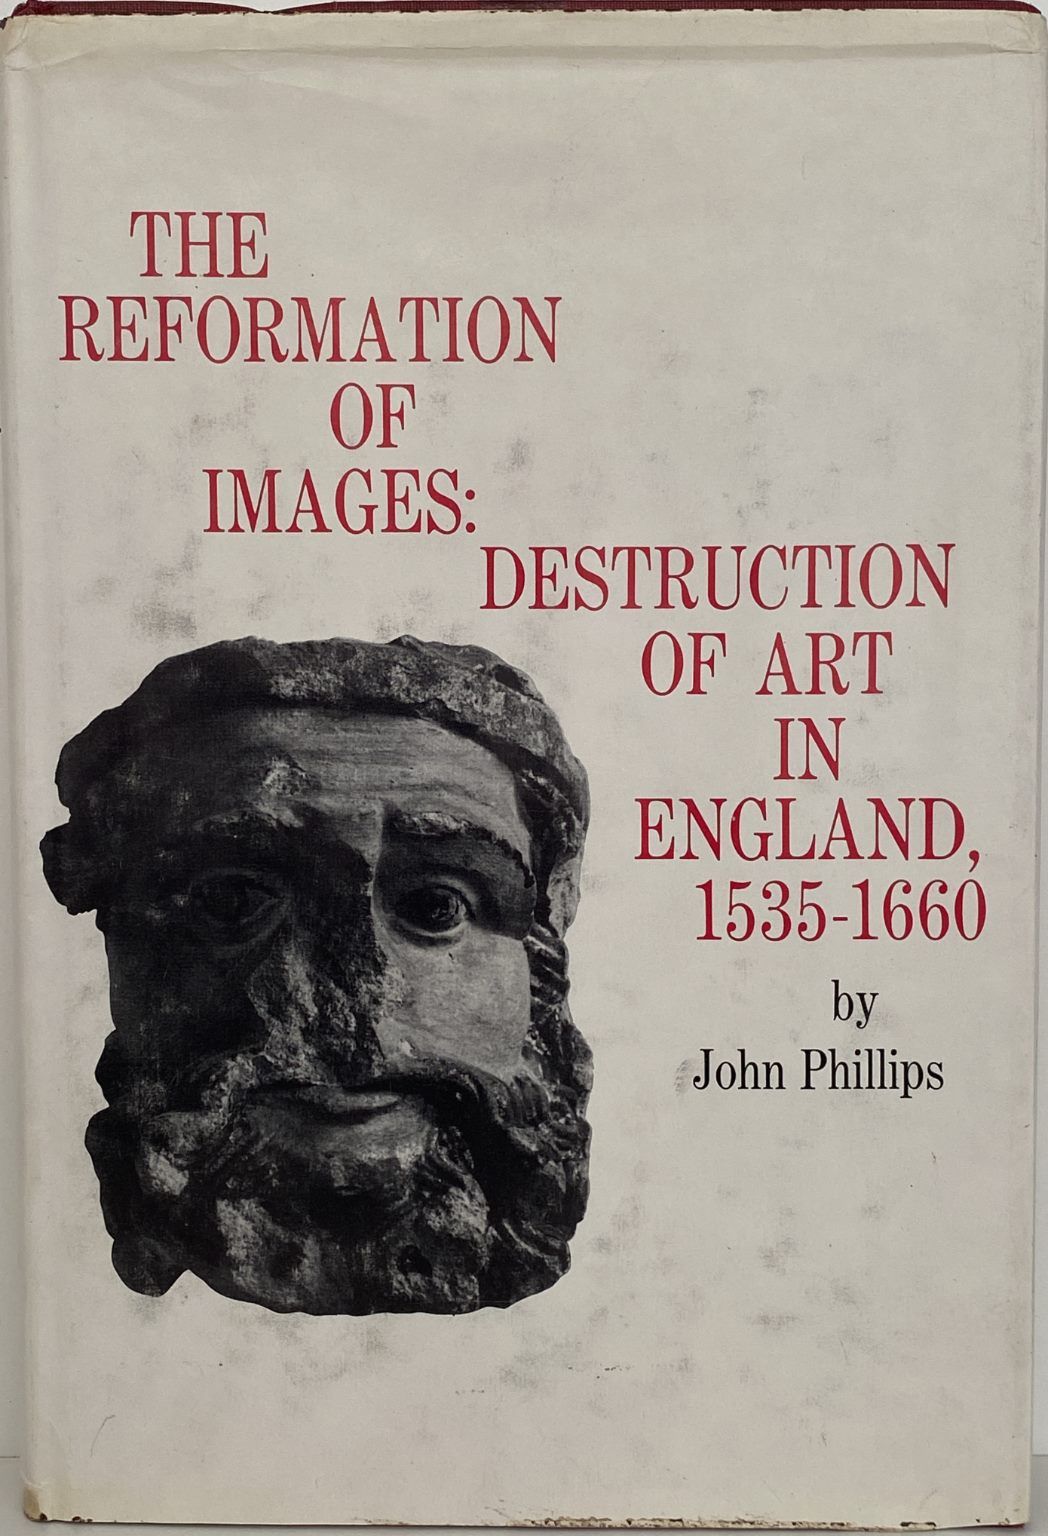 THE REFORMATION OF IMAGES: Destruction of Art in England 1535-1660